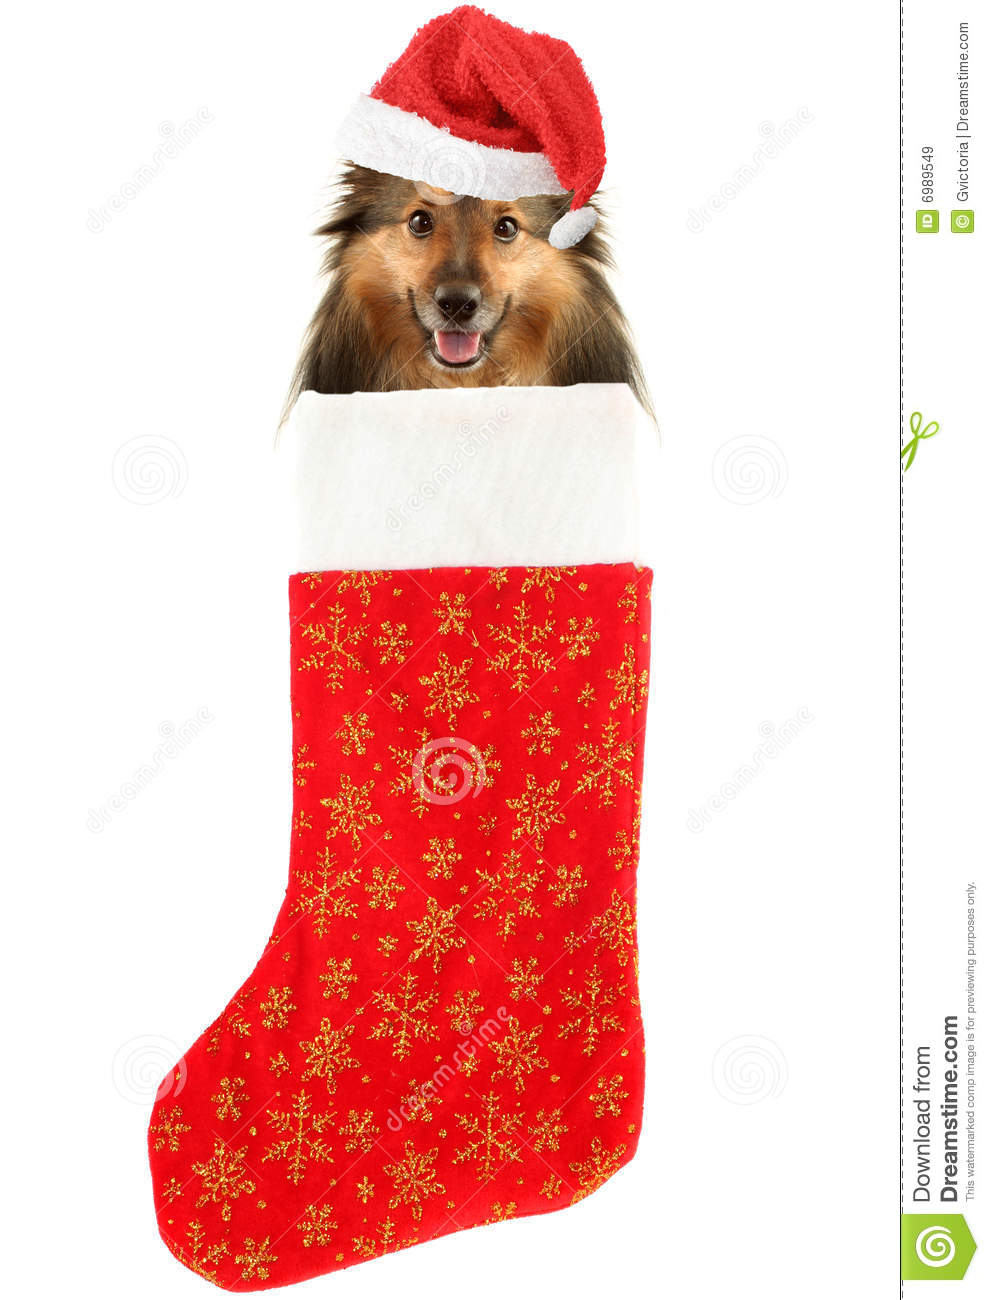 Sheltie With Santa Claus Hat Inside Festive Christmas Stocking With